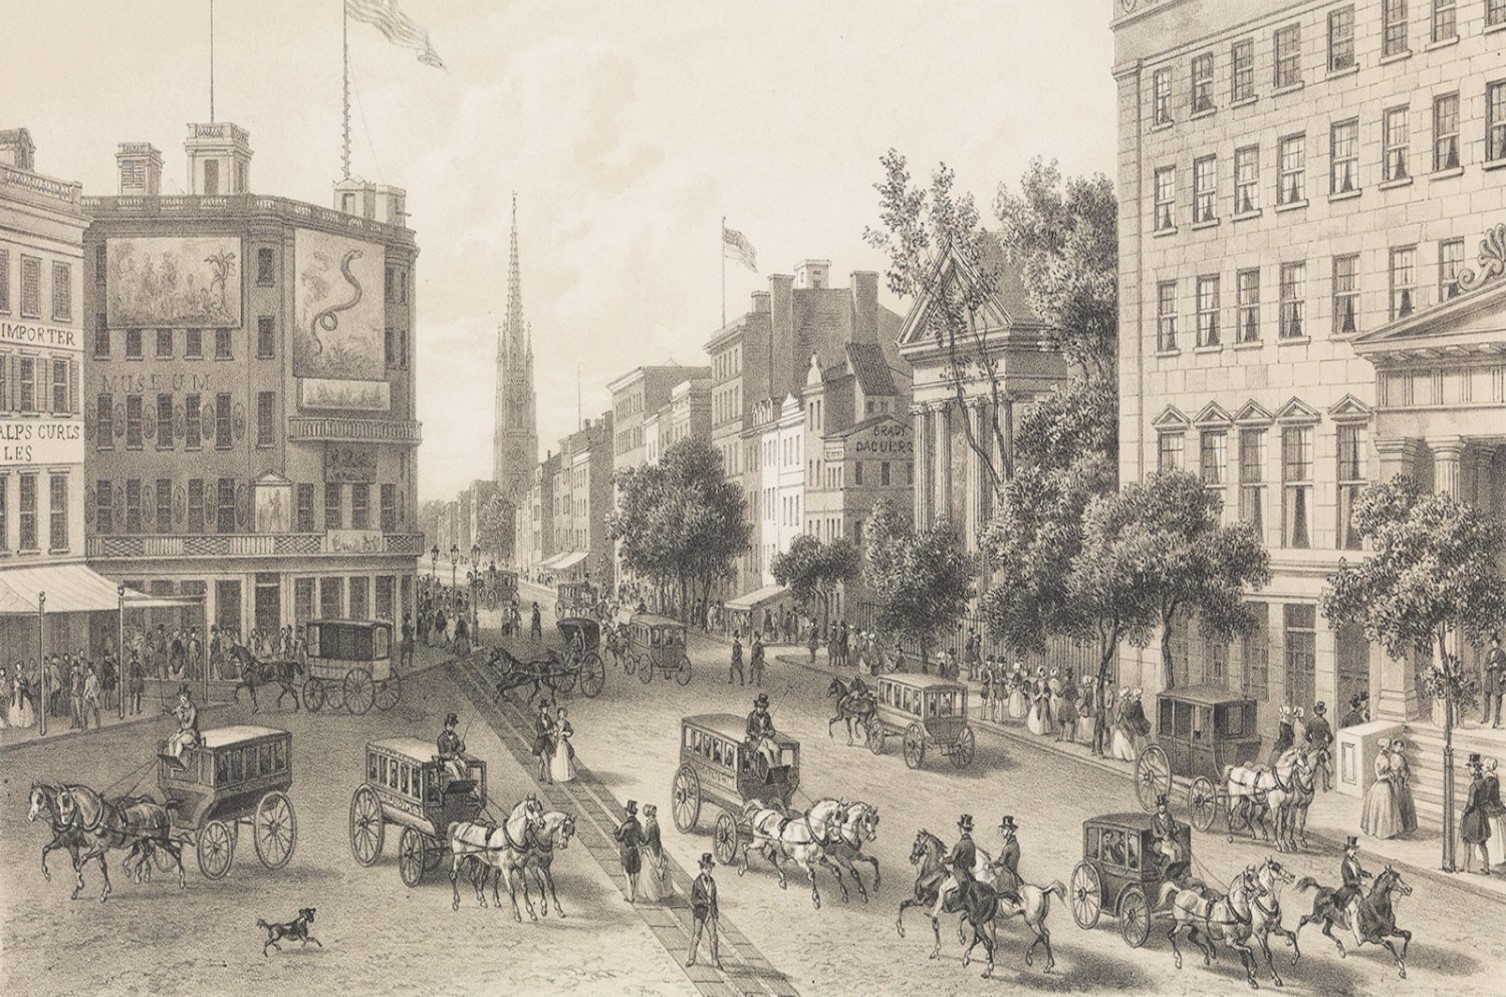 A New York City street busy with horsecars and pedestrians around 1850.